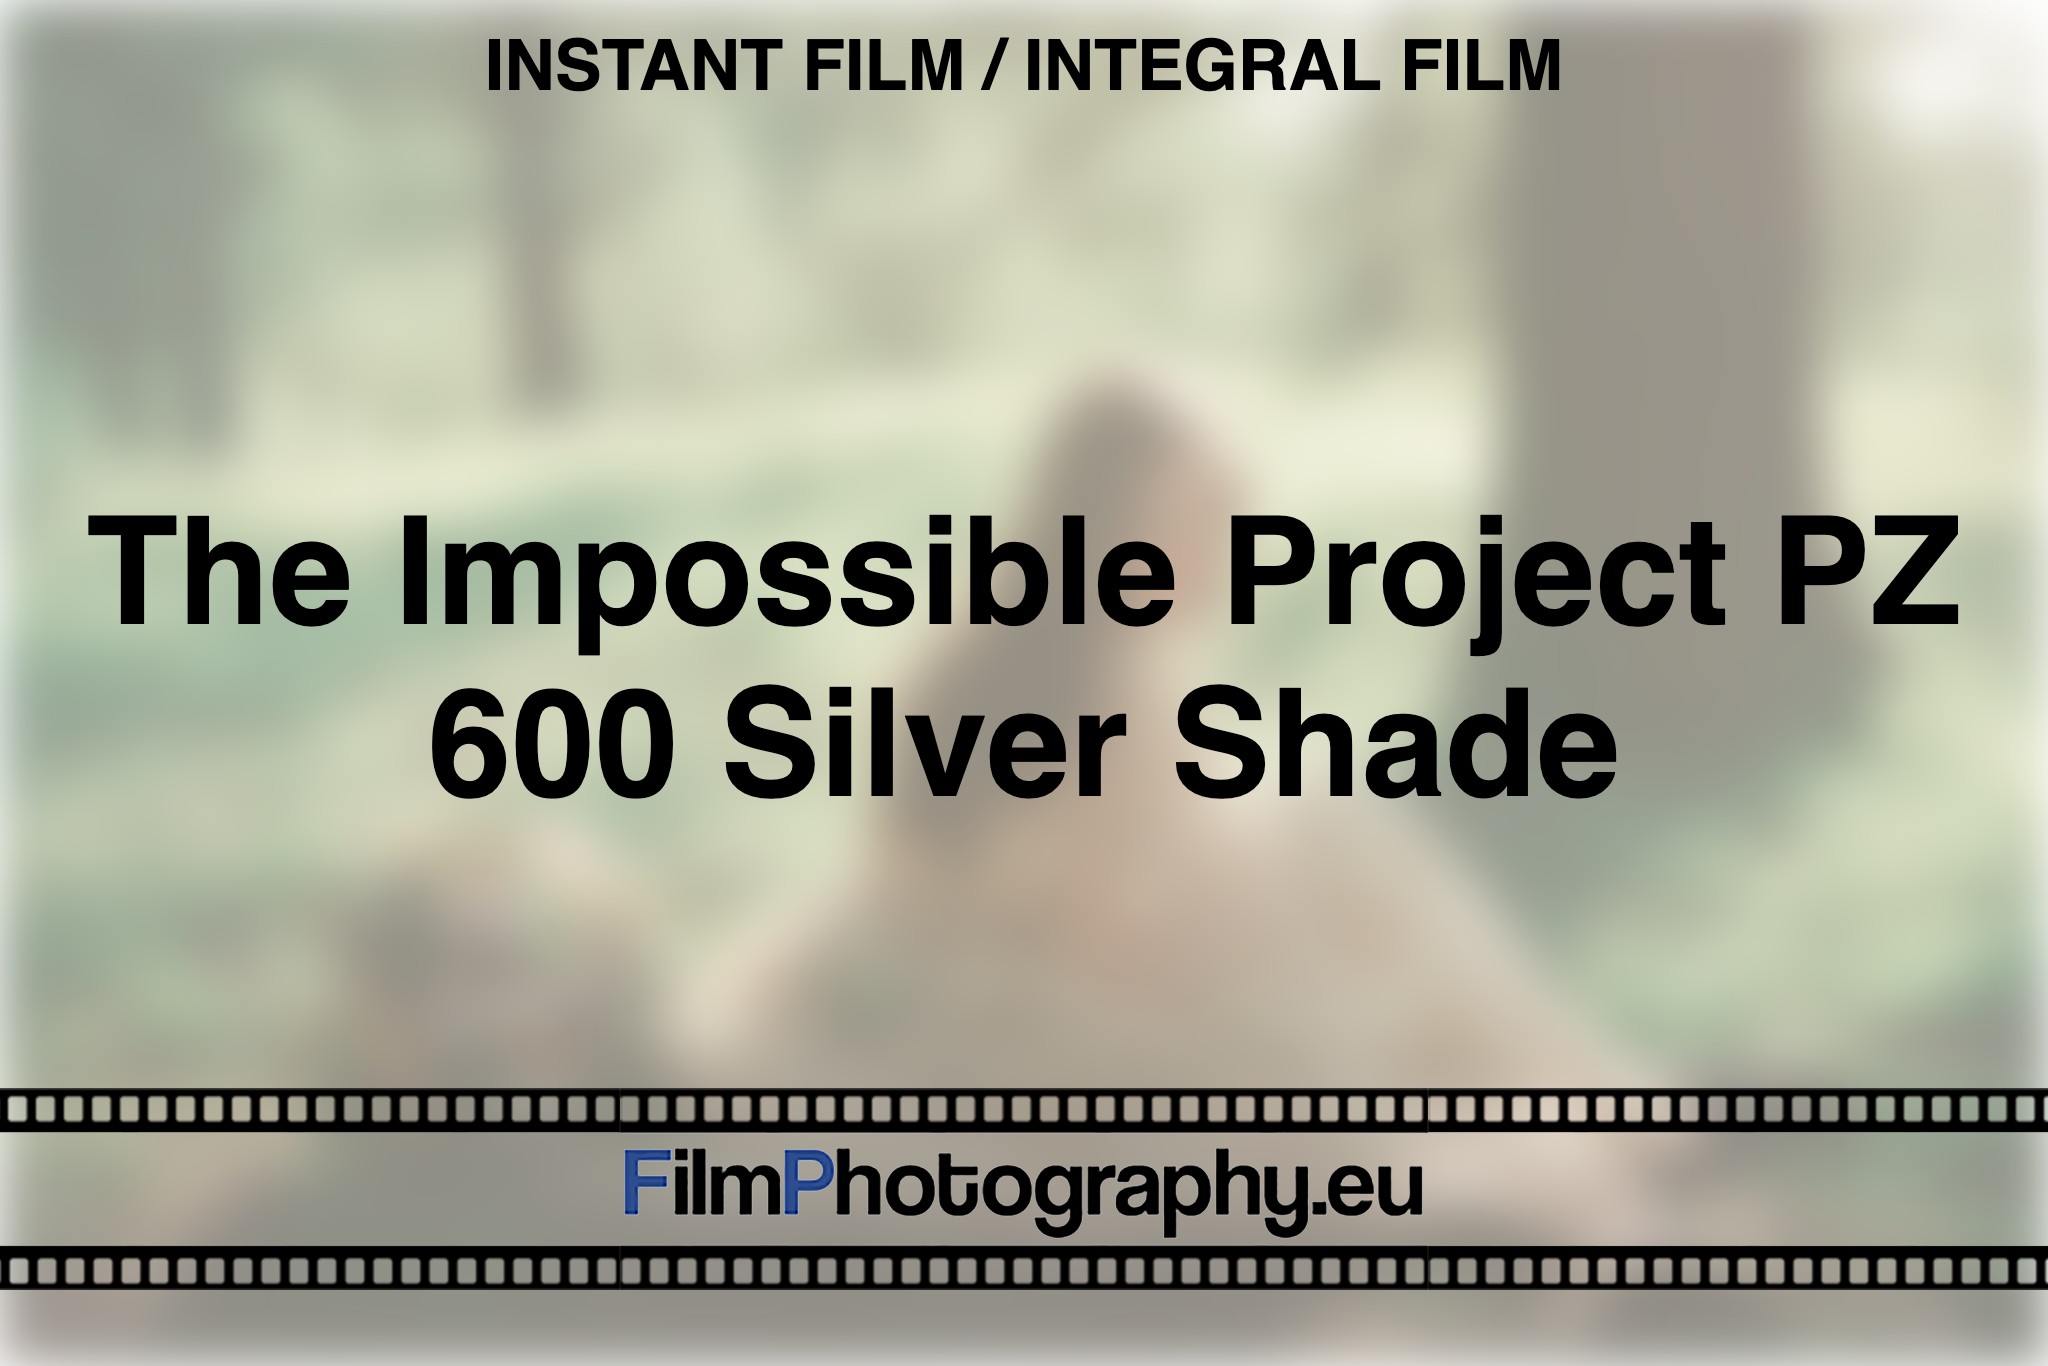 the-impossible-project-pz-600-silver-shade-instant-film-integral-film-bnv